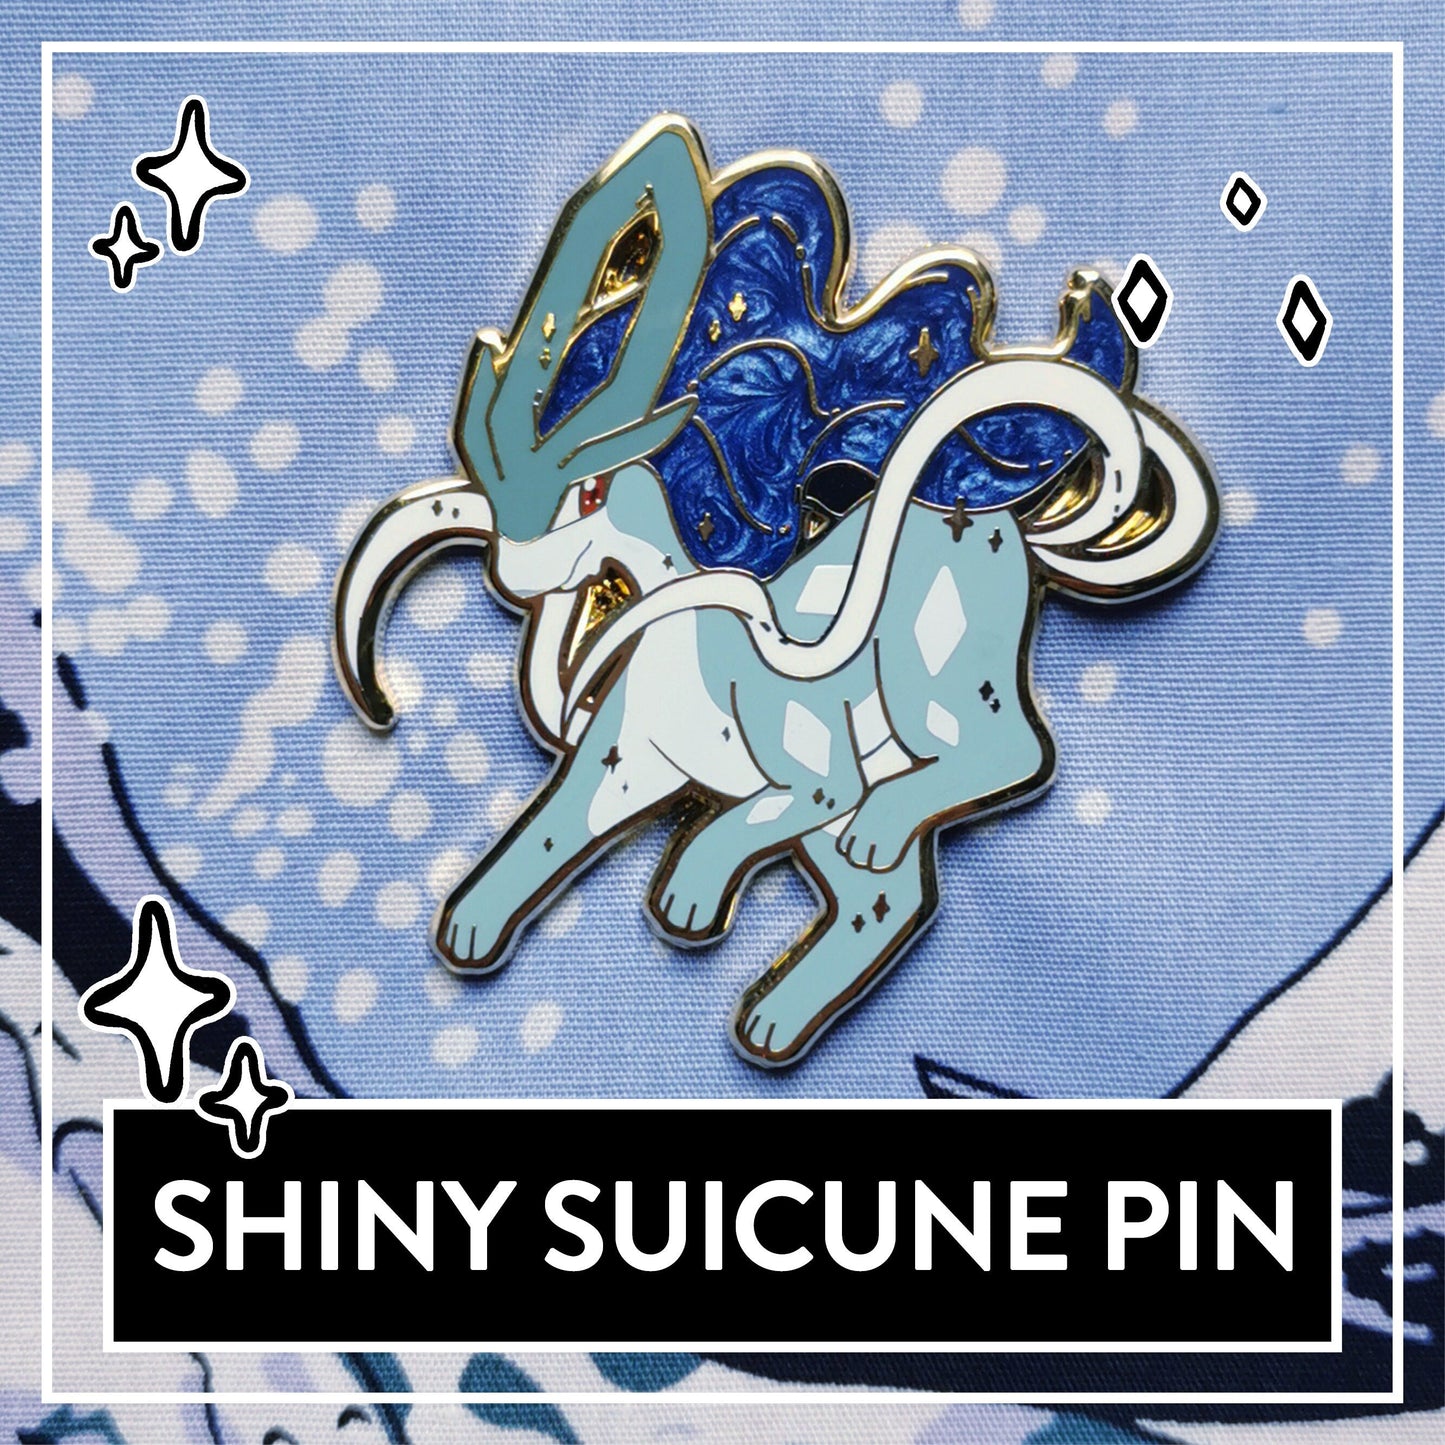 Shiny Suicine Pin - normal or shiny version